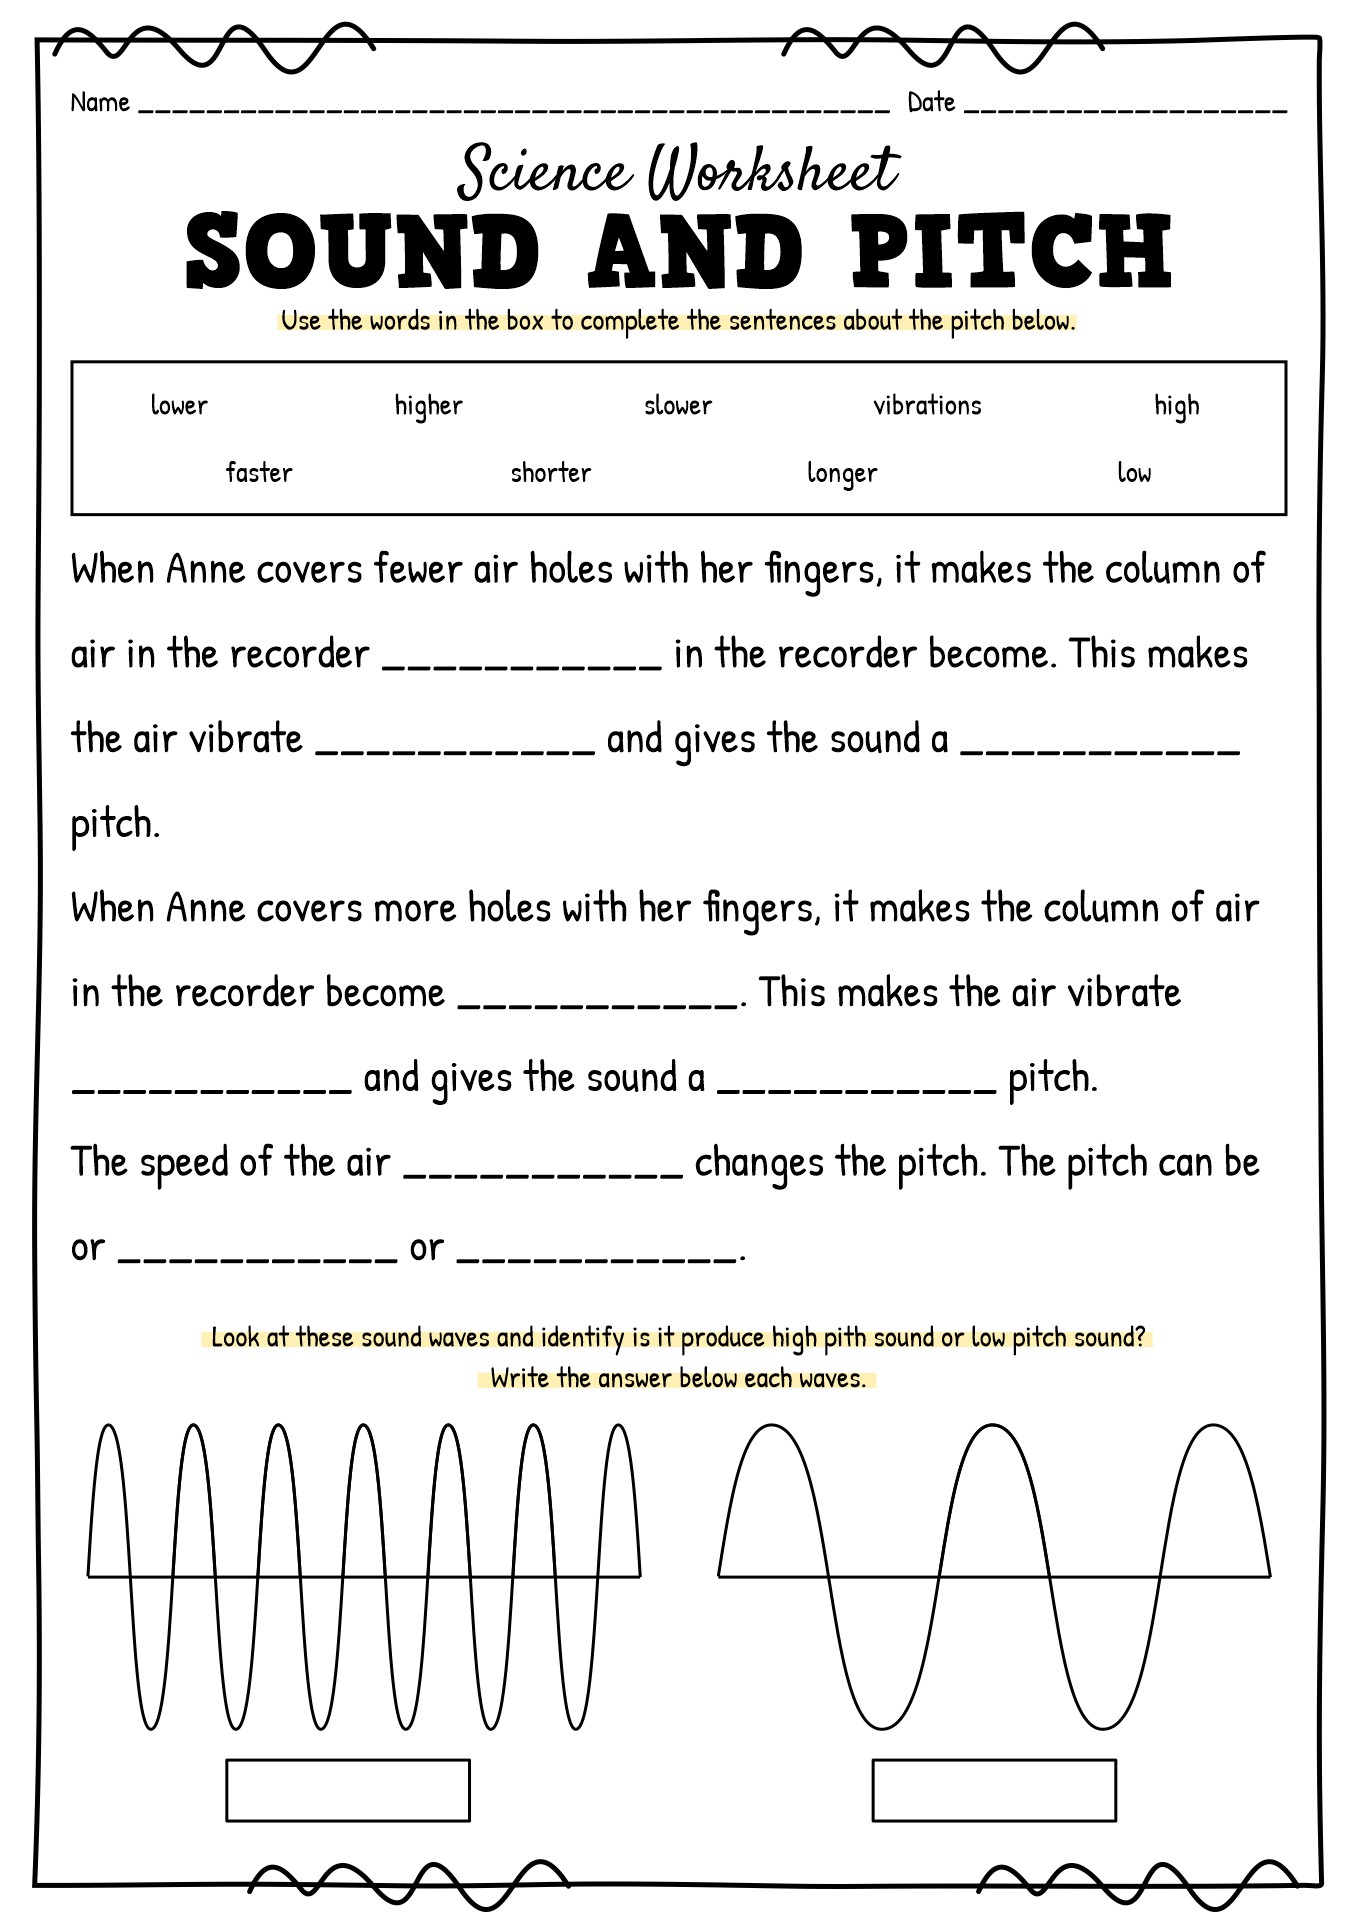 Pitch Sound Science Worksheets Image